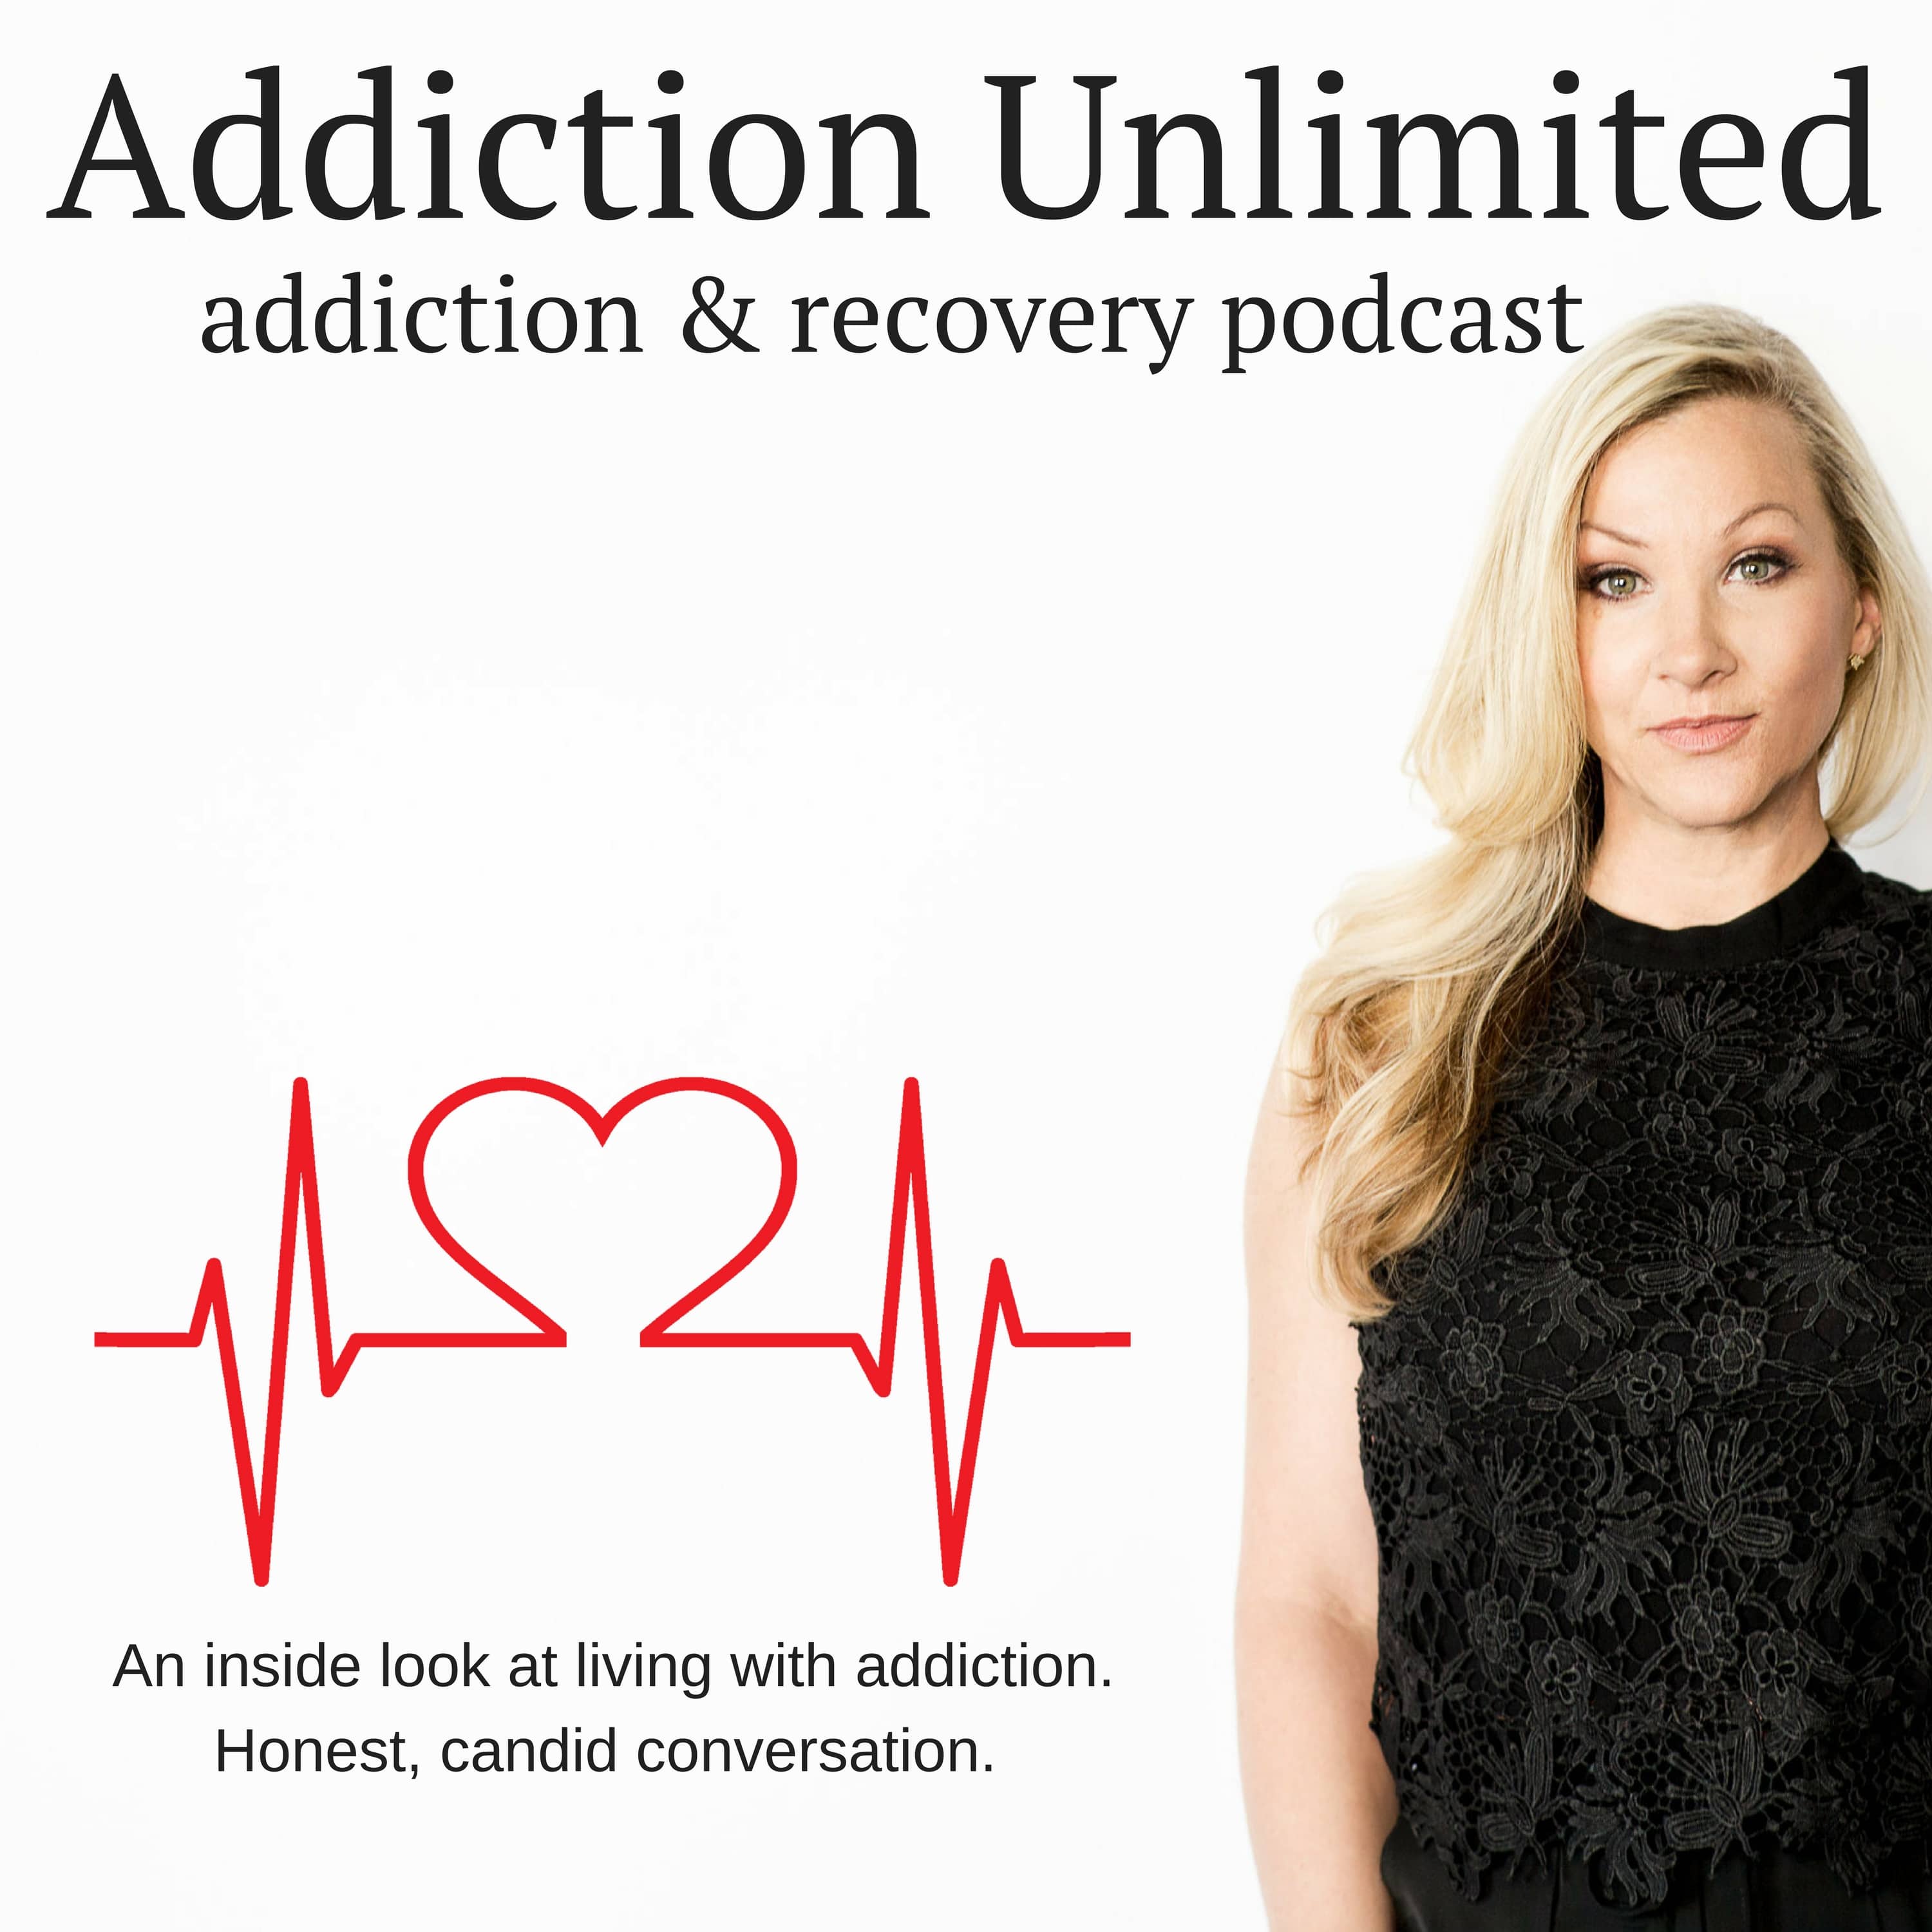 Tricia Lewis from Recovery Happy Hour Podcast